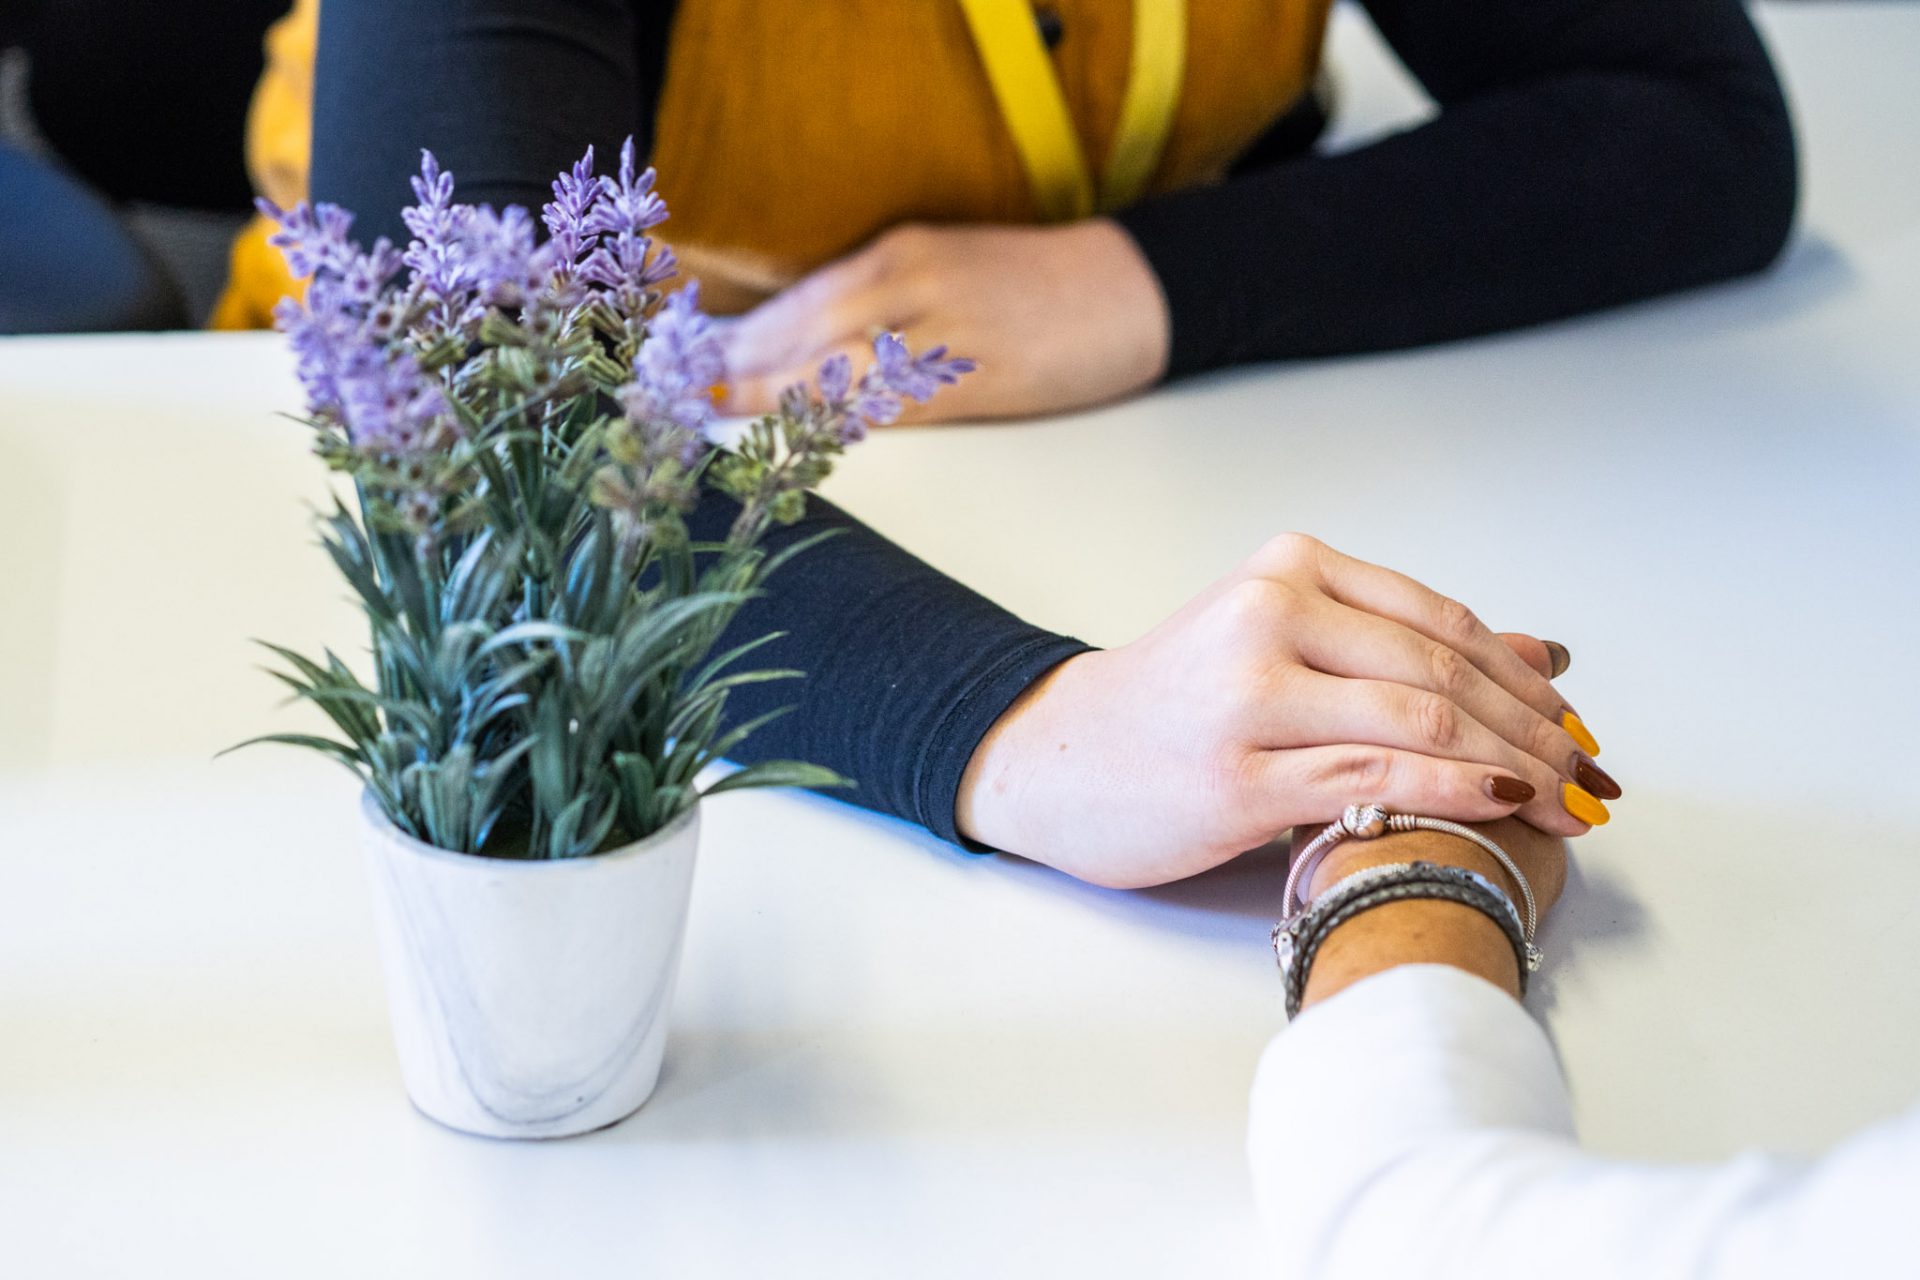 Two people holding hands across a white table. Next to them is a pot of purple flowers.